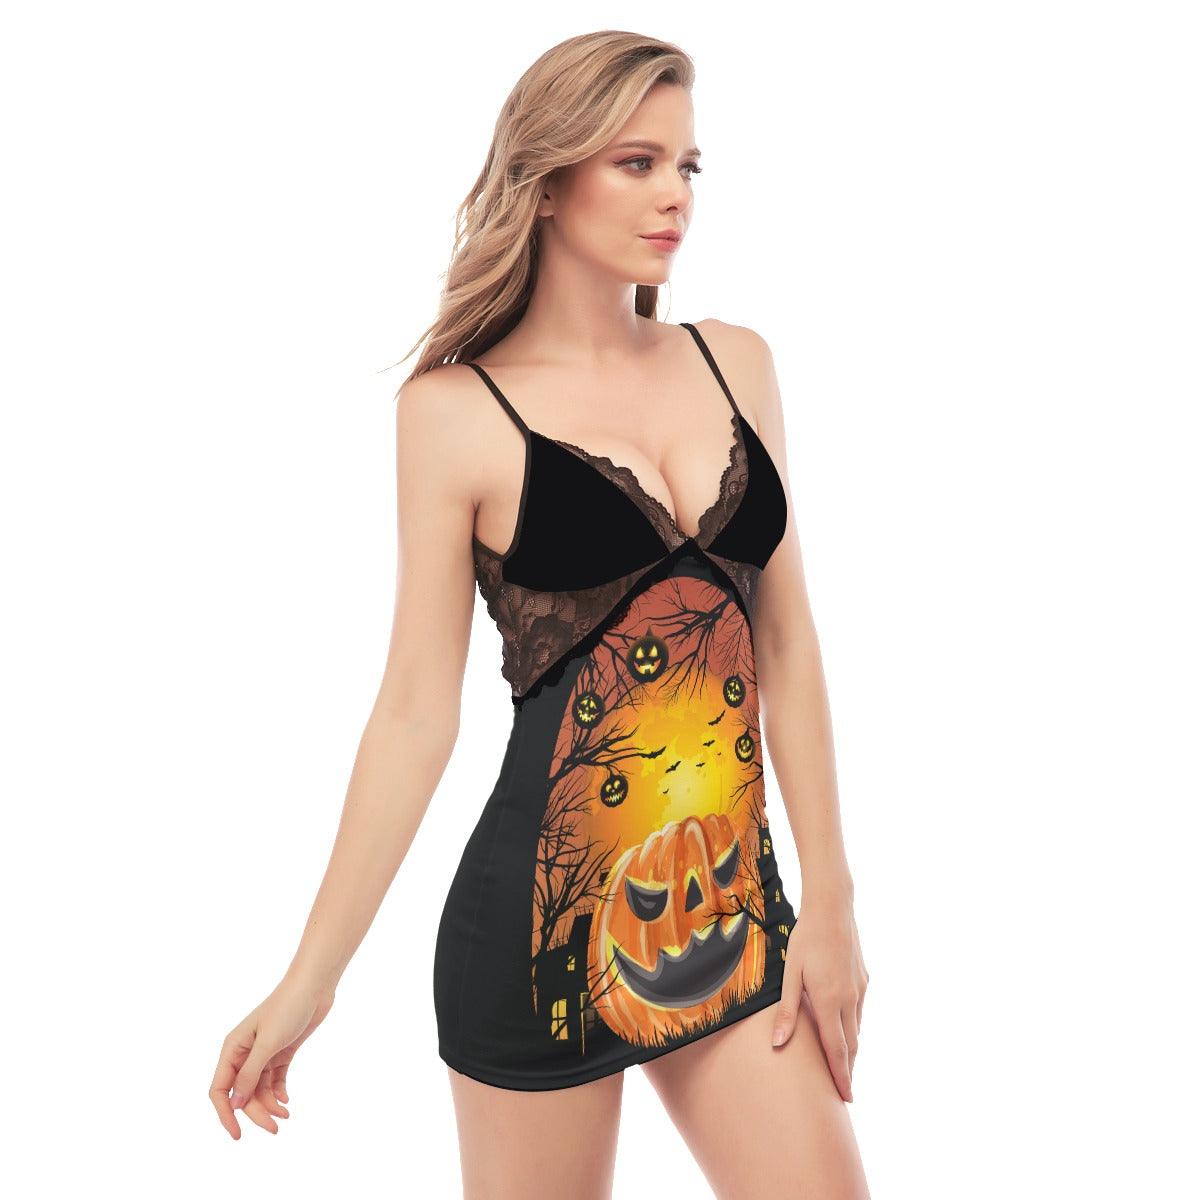 Laughing Scary Pumpkin Lace Chemise Nightgown - Wonder Skull